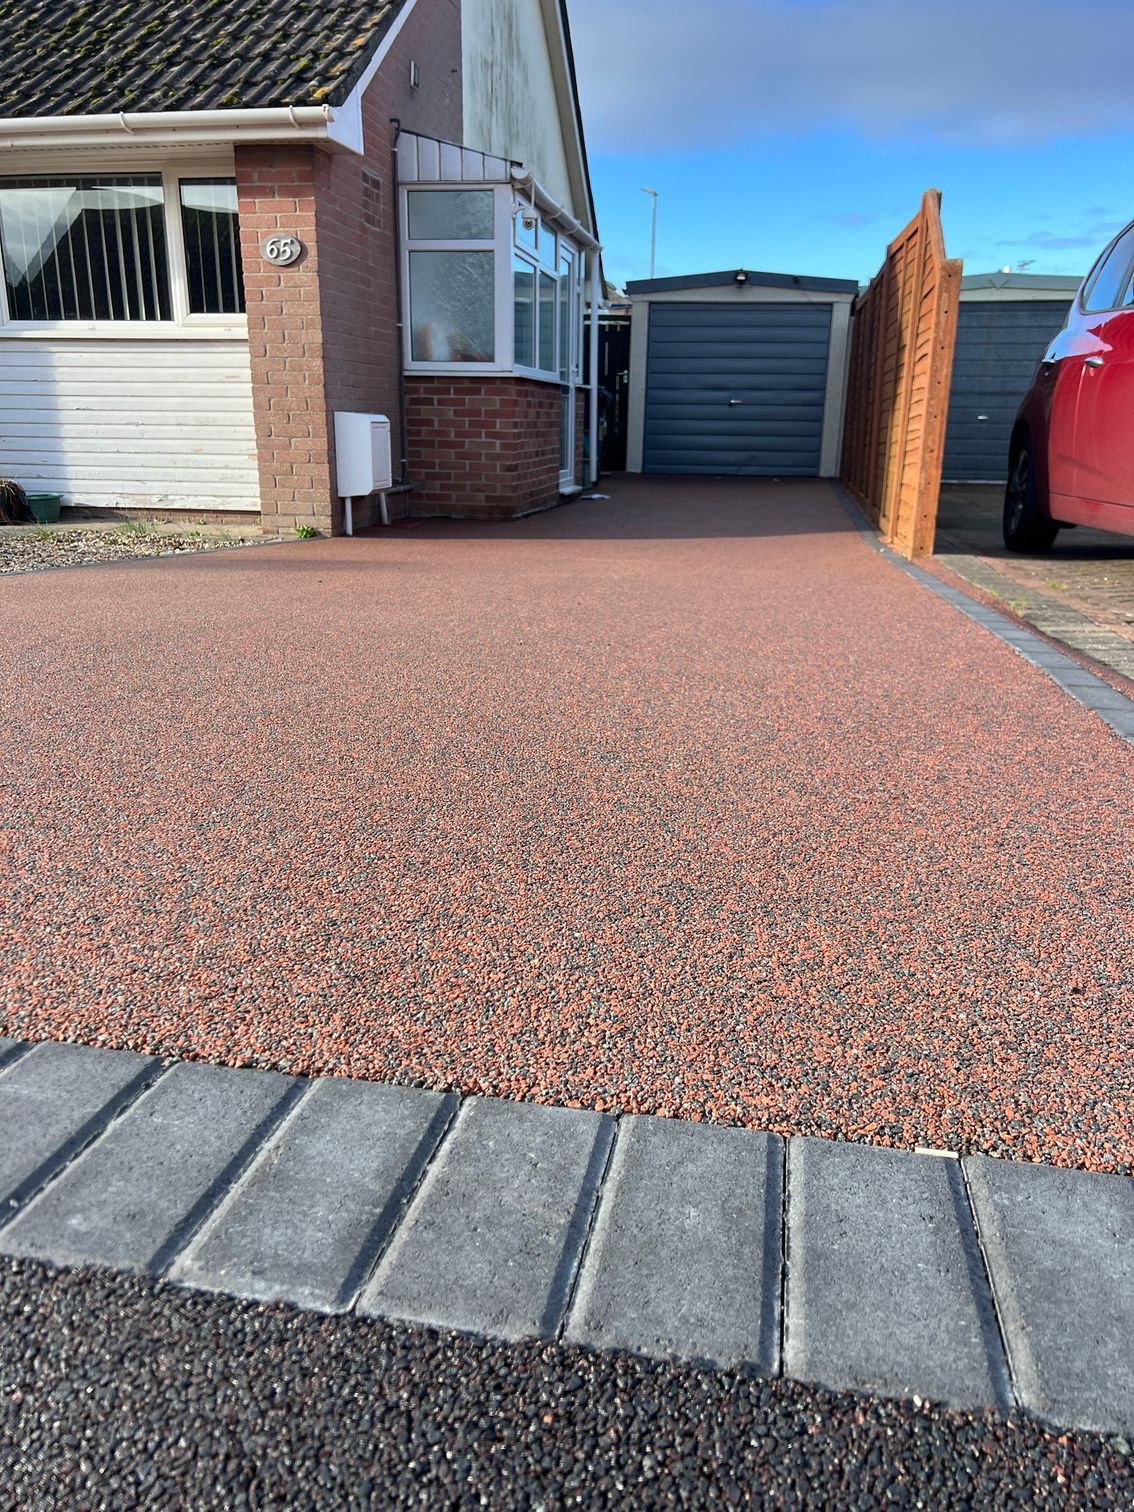 Red resin driveway with a grey block paving border, leading up to a black garage next to red brick.